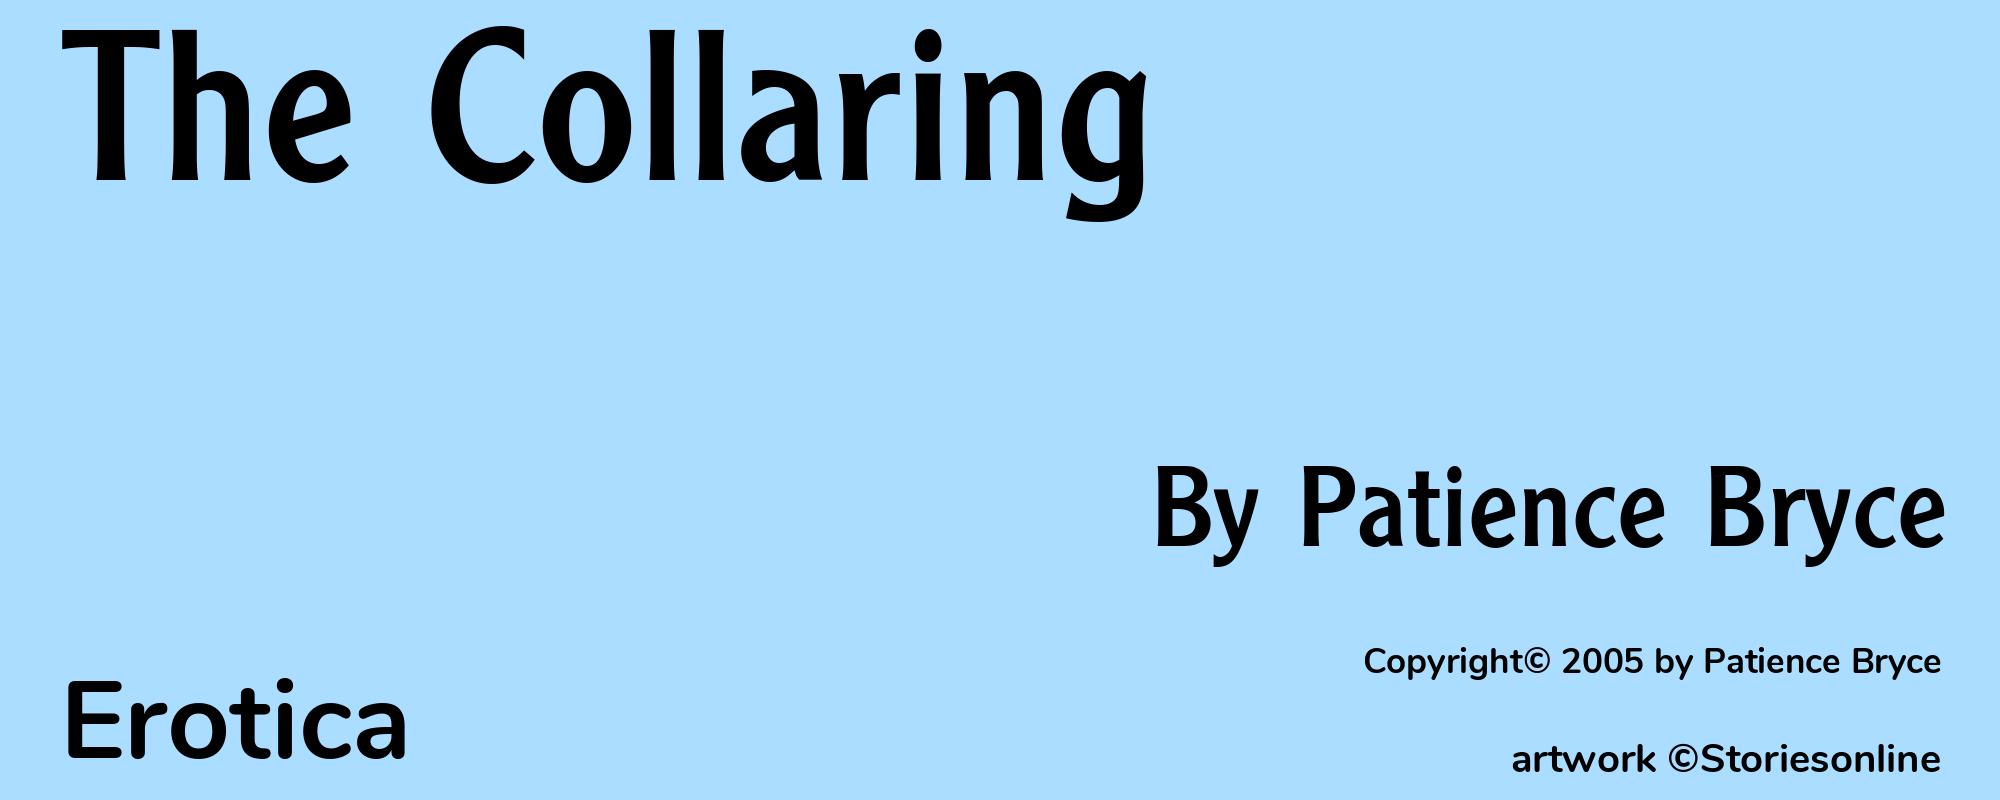 The Collaring - Cover